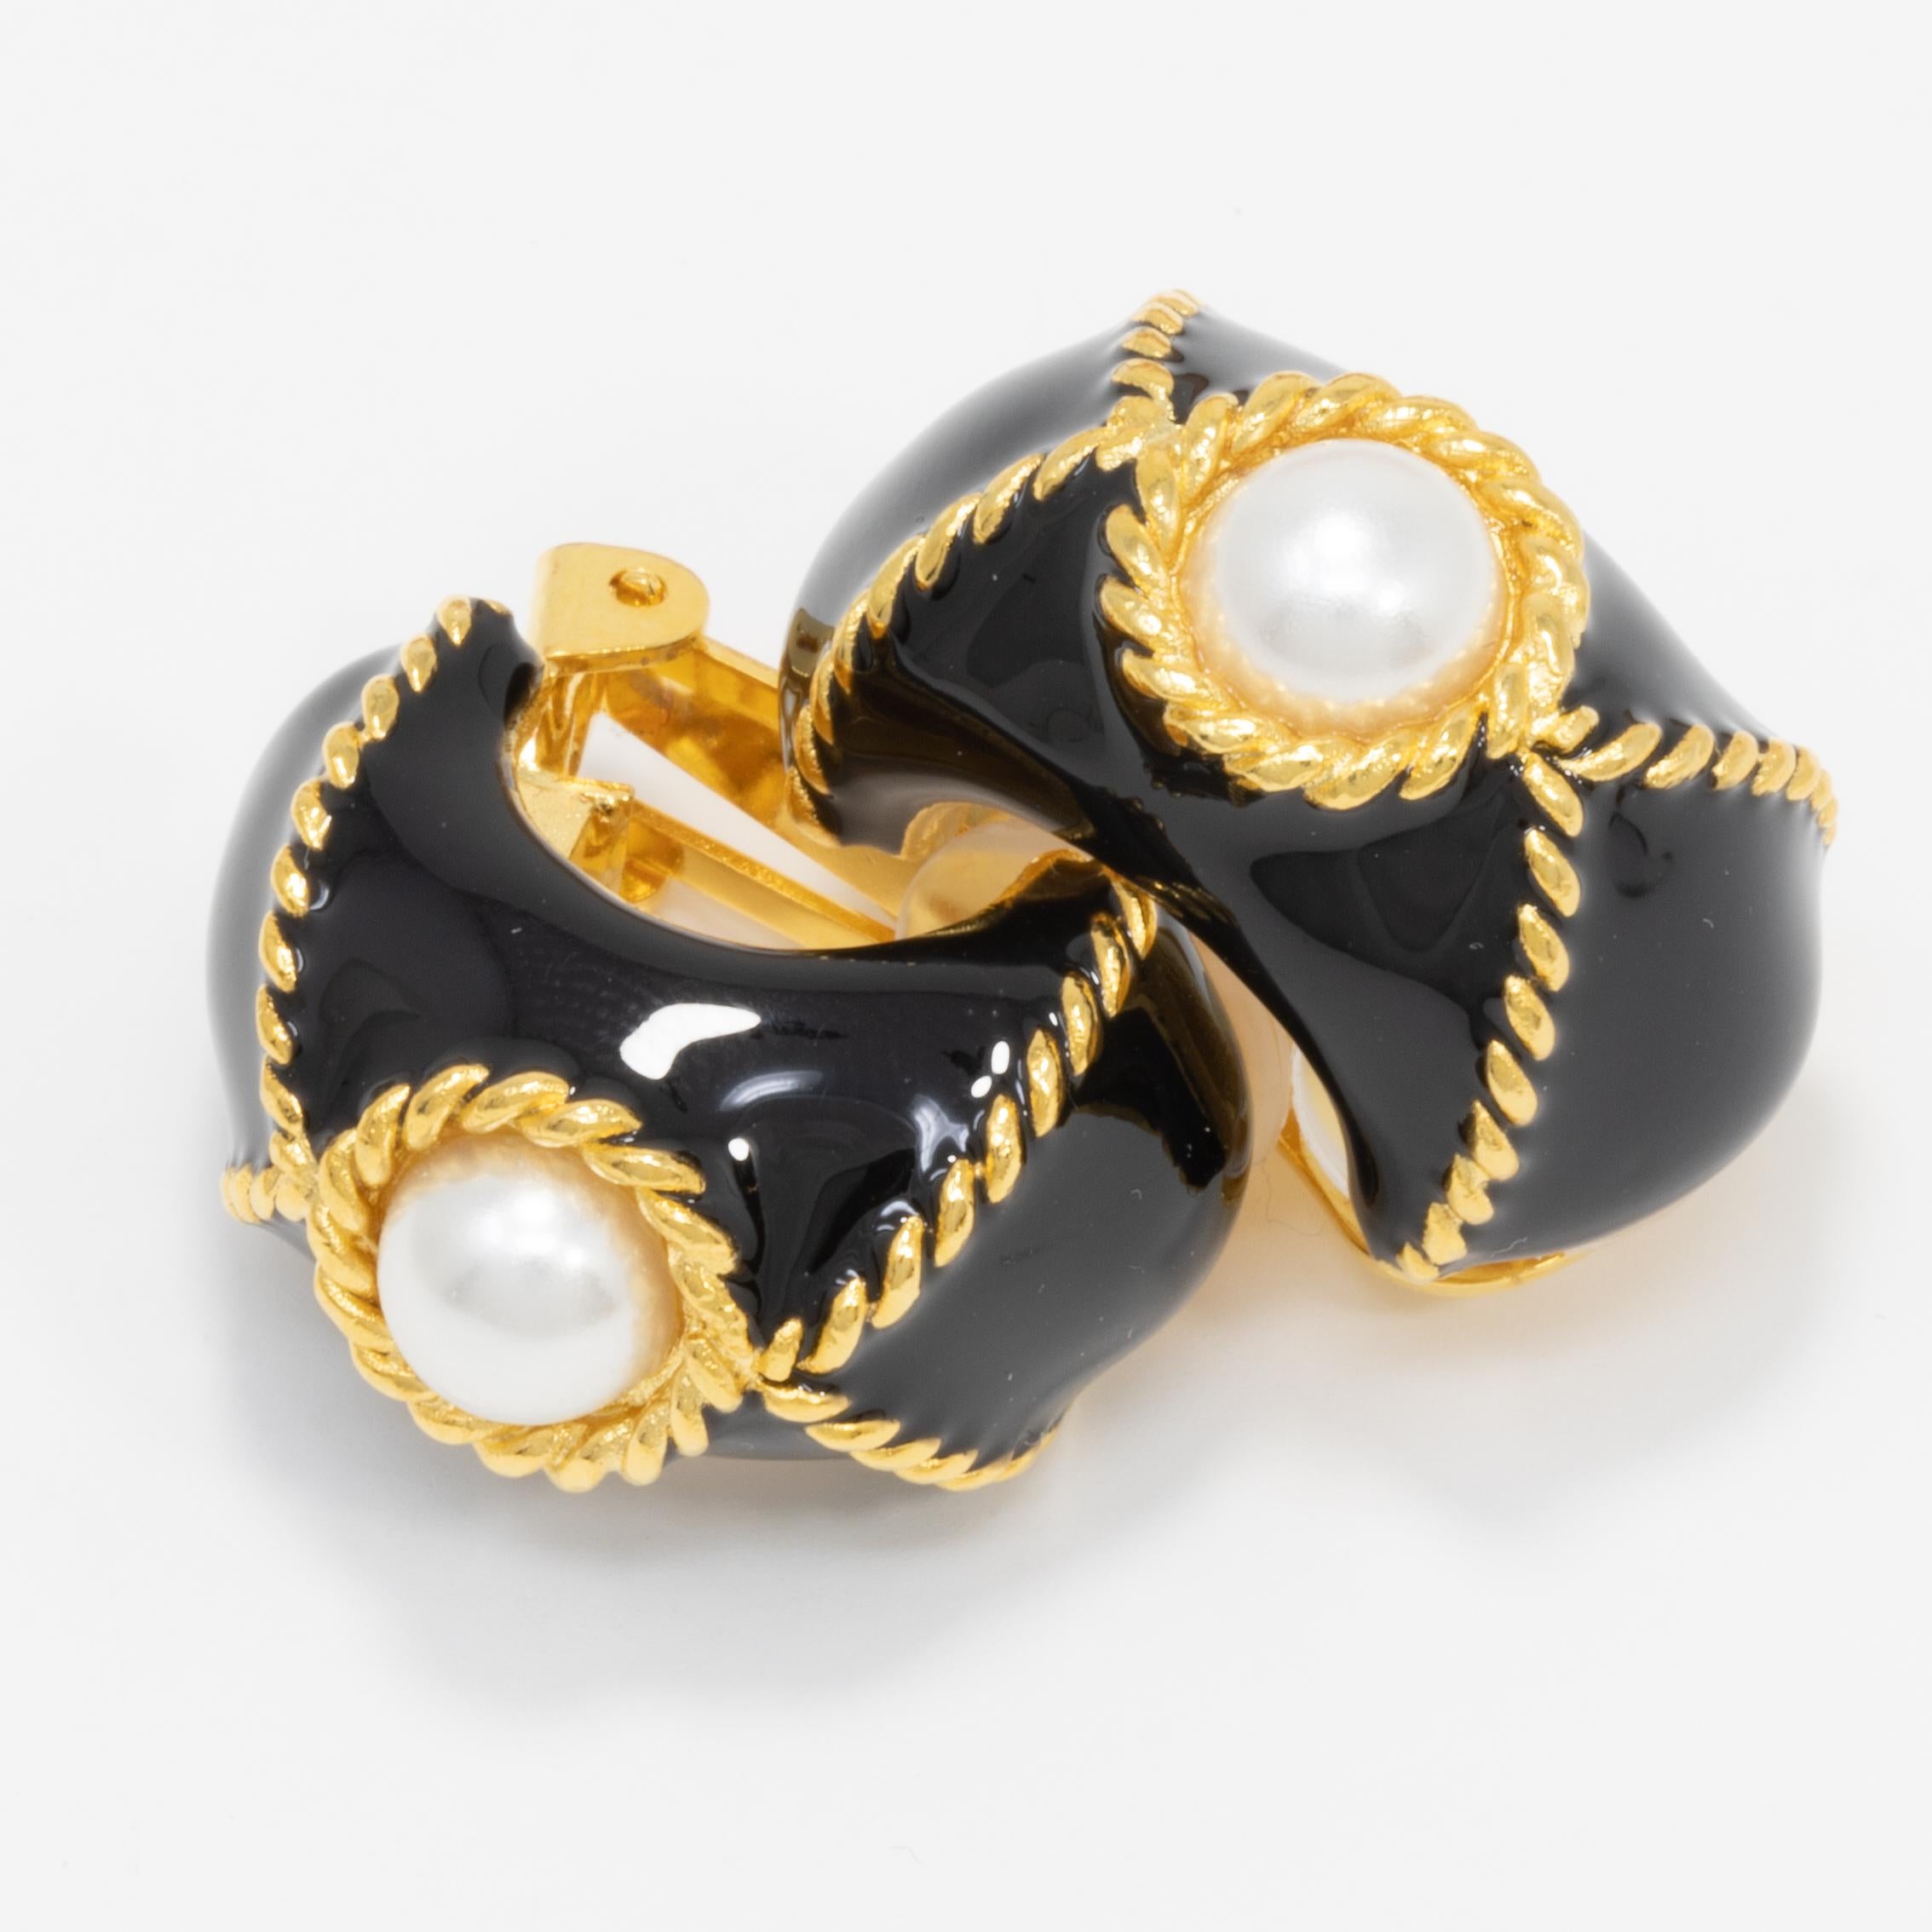 A pair of clip on earrings by Kenneth Jay Lane. Each gold-plated earrings is painted in black enamel, and decorated with a faux pearl centerpiece and gold accents.

Tags, Marks, Hallmarks: KJL, Made in USA